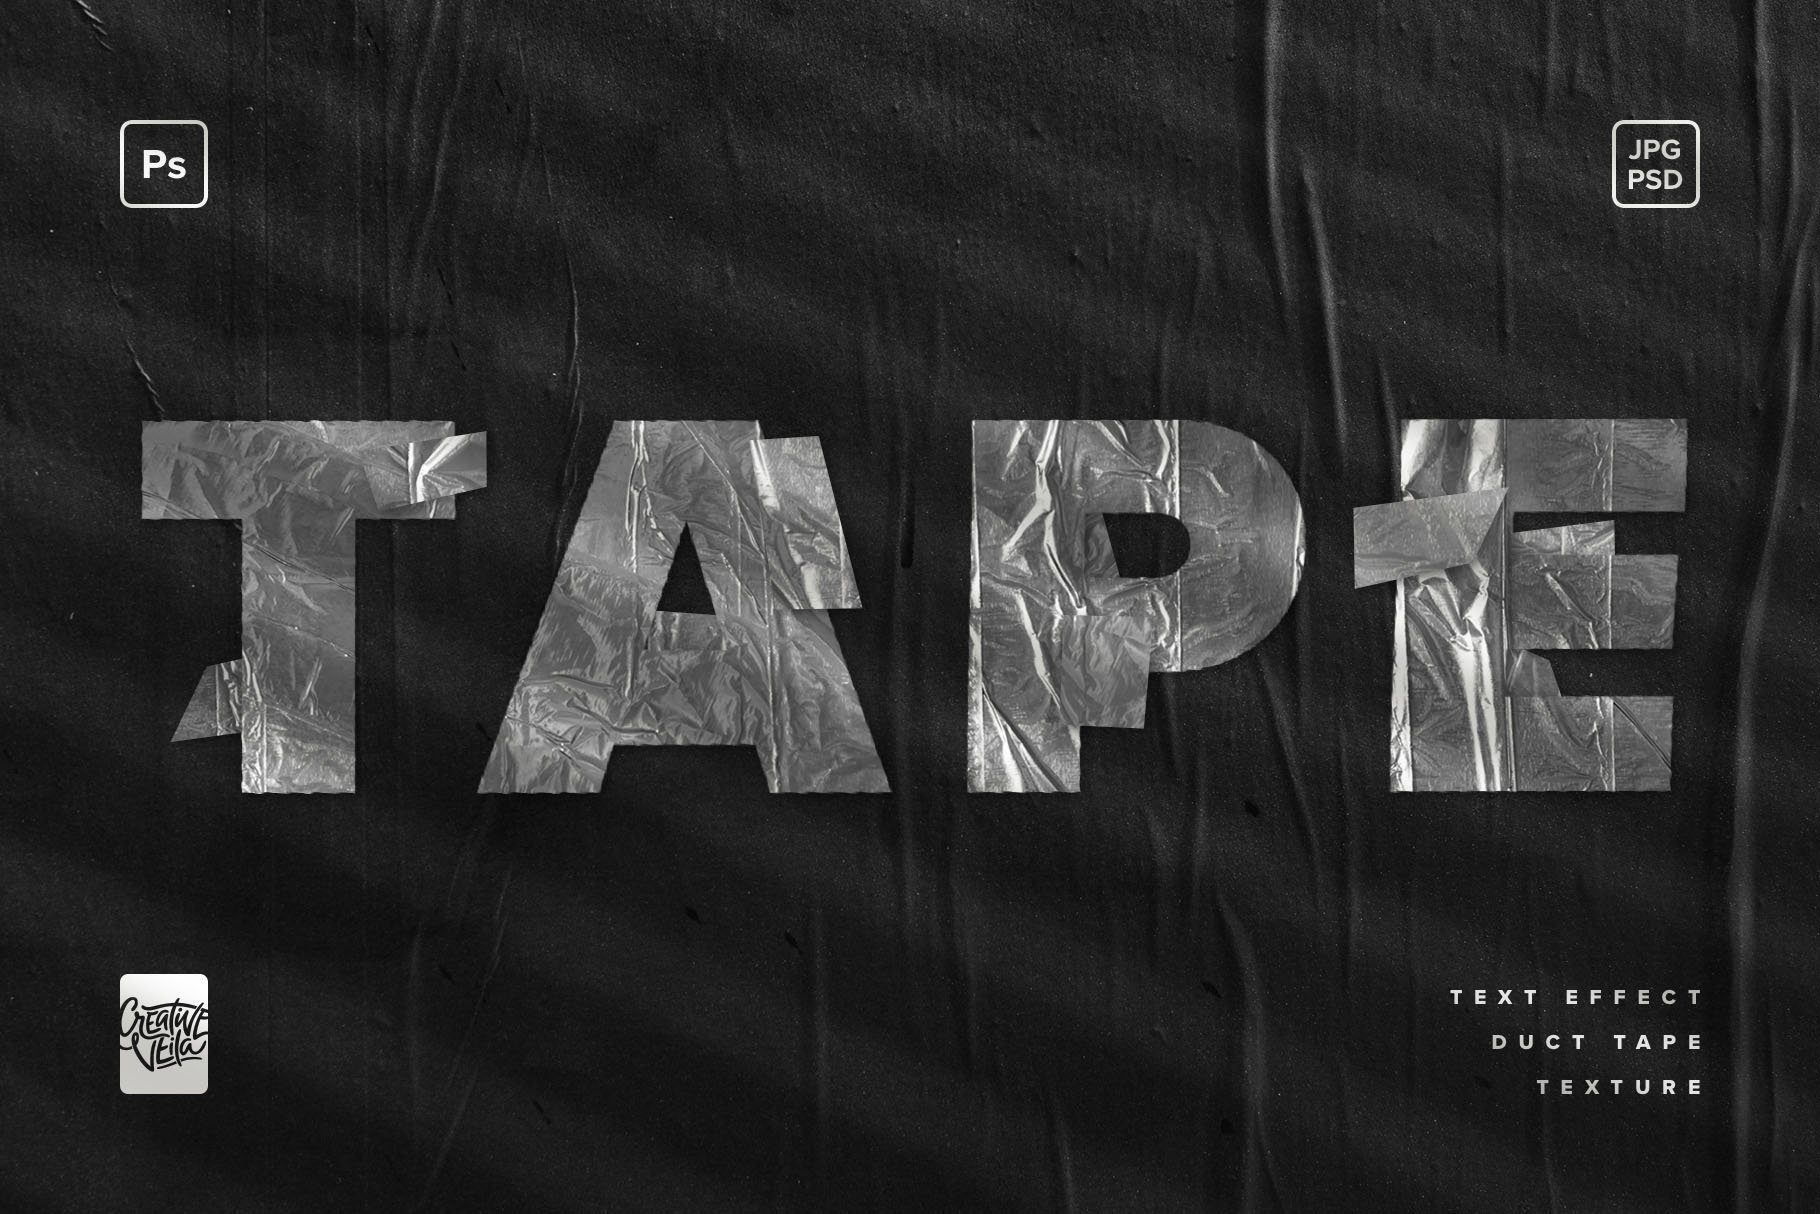 Duct Tape Text Effect Mockupcover image.